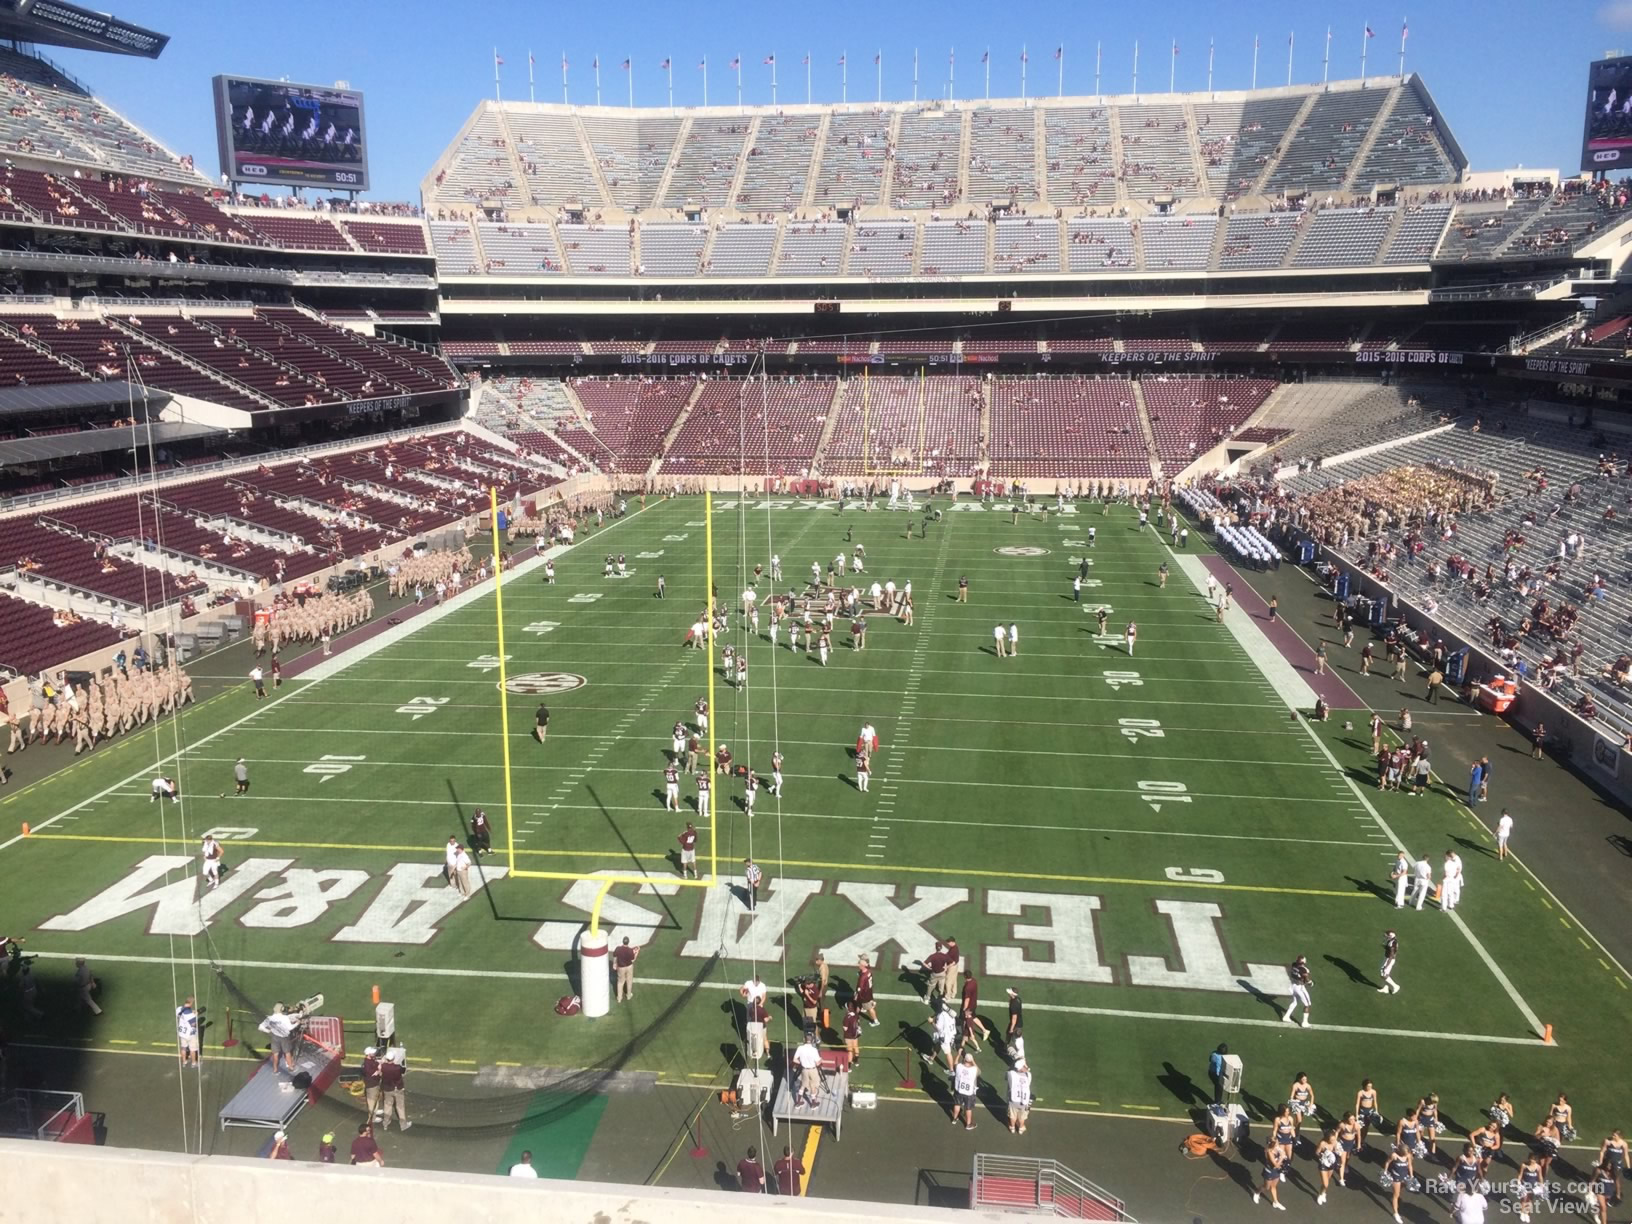 section 243, row 7 seat view  - kyle field